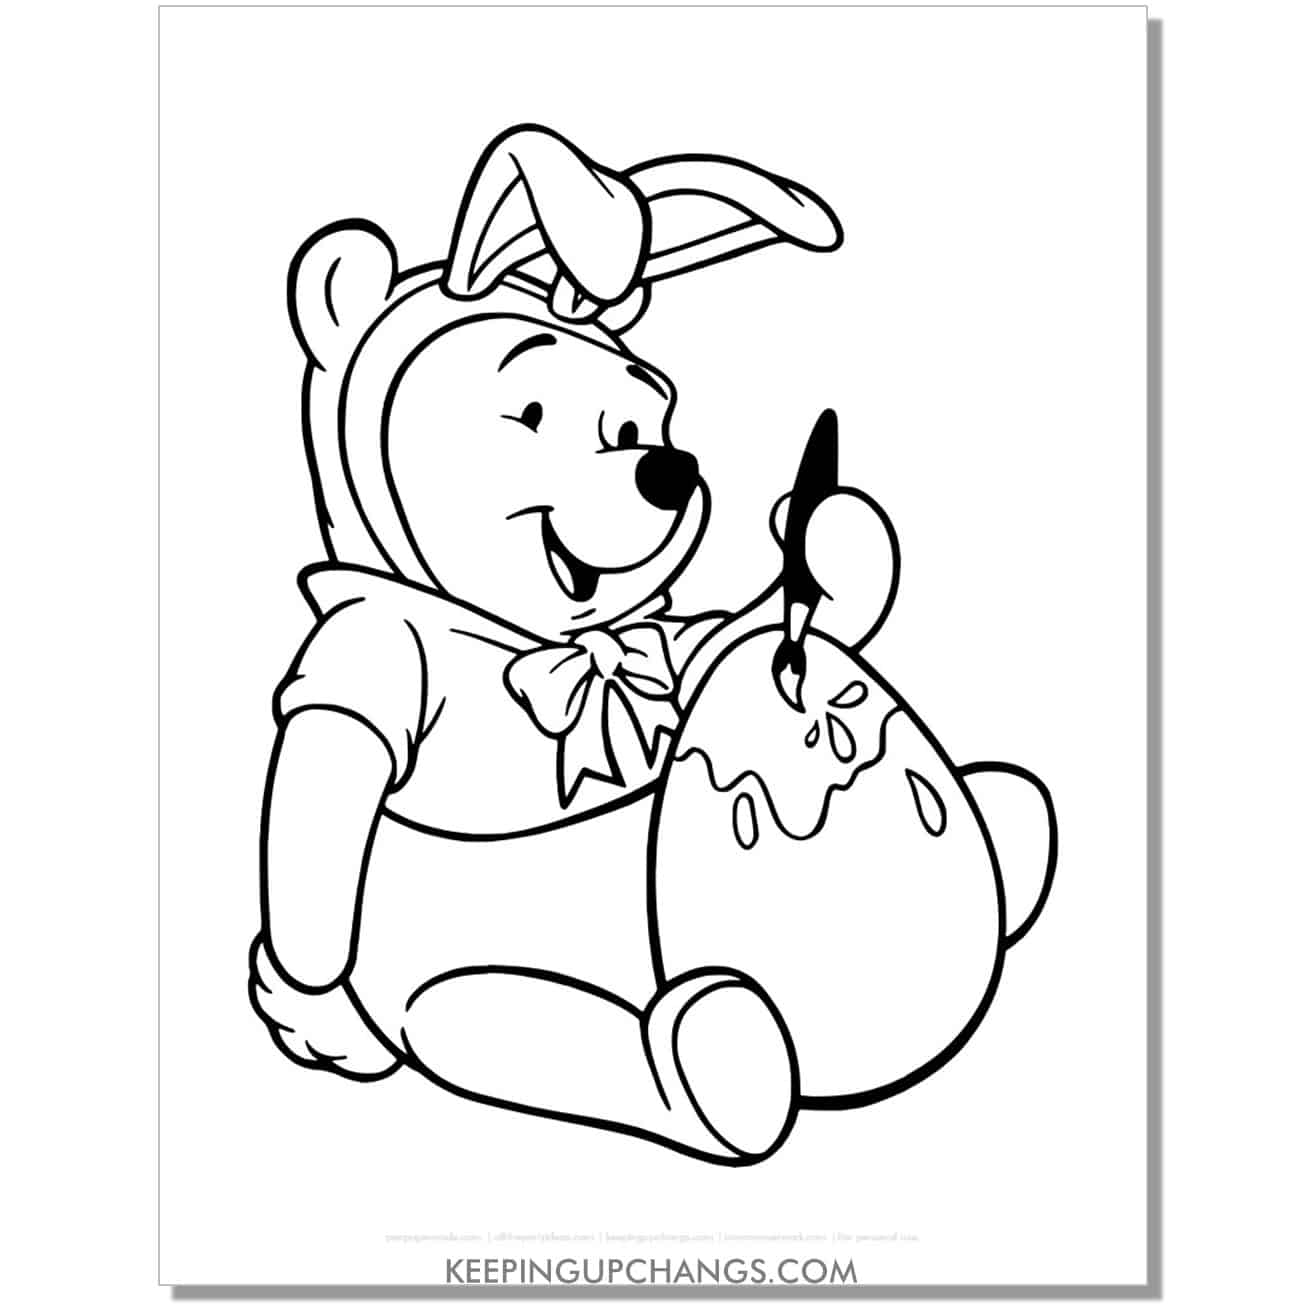 winnie the pooh painting large easter egg coloring page, sheet.